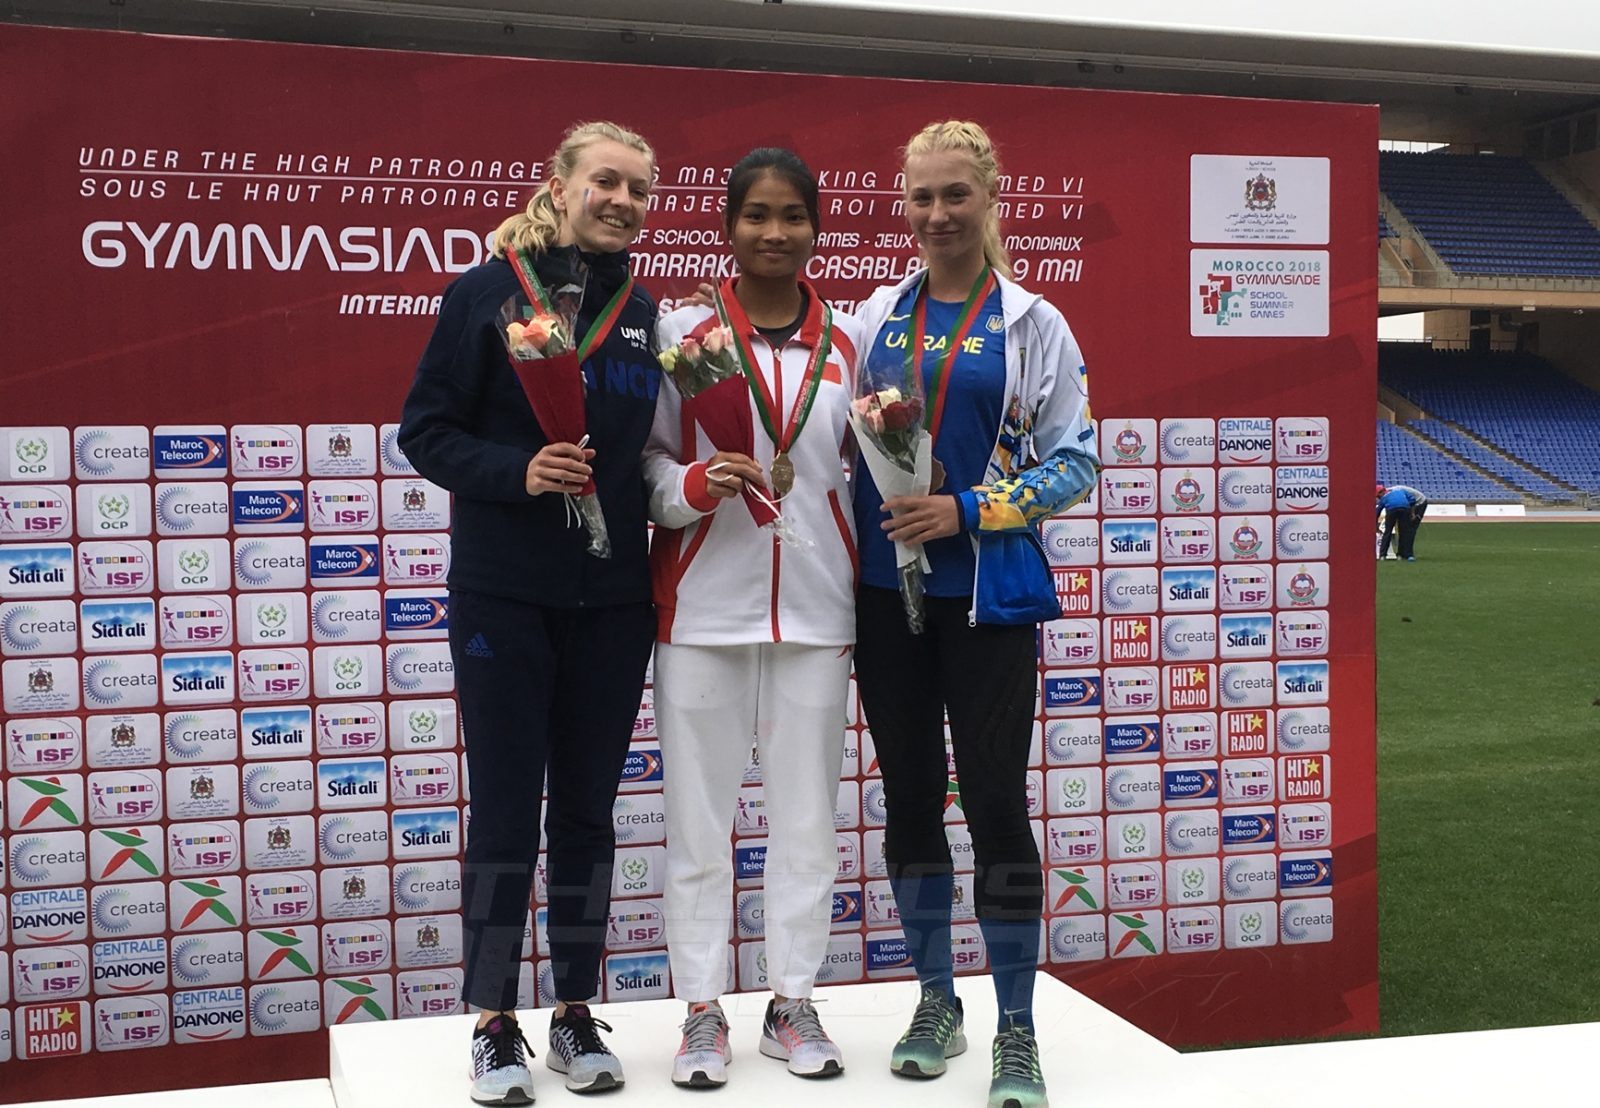 China's He Li (C) flanked by Marie Ange Rimlinger of France and Yeva Podhorodetska of Ukraine on the podium after the Girls 100m medal presentation at Gymnasiade 2018 in Marrakech / Photo Credit: Yomi Omogbeja